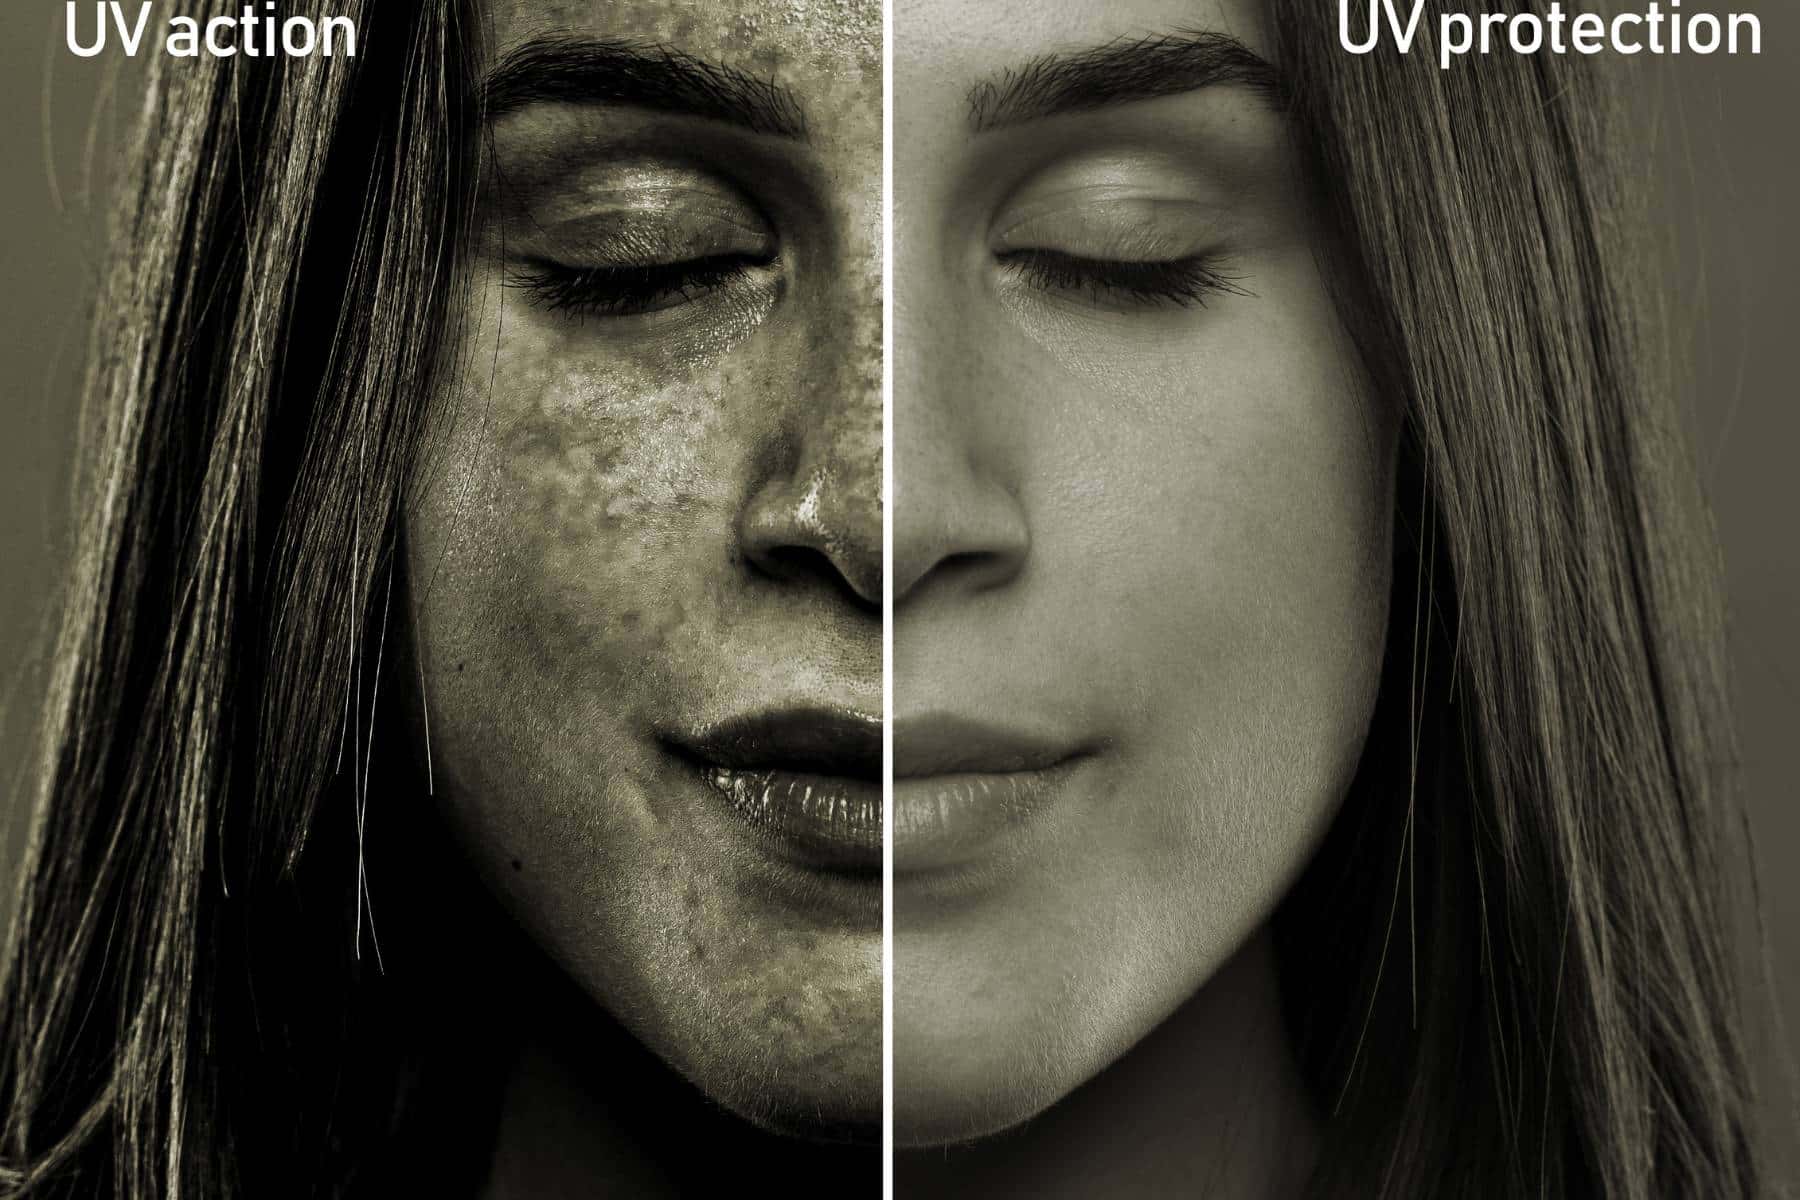 A split screen showing the results of sun rays on the soft face of a girl in her early twenties. After effects of skin with and without UV protection.